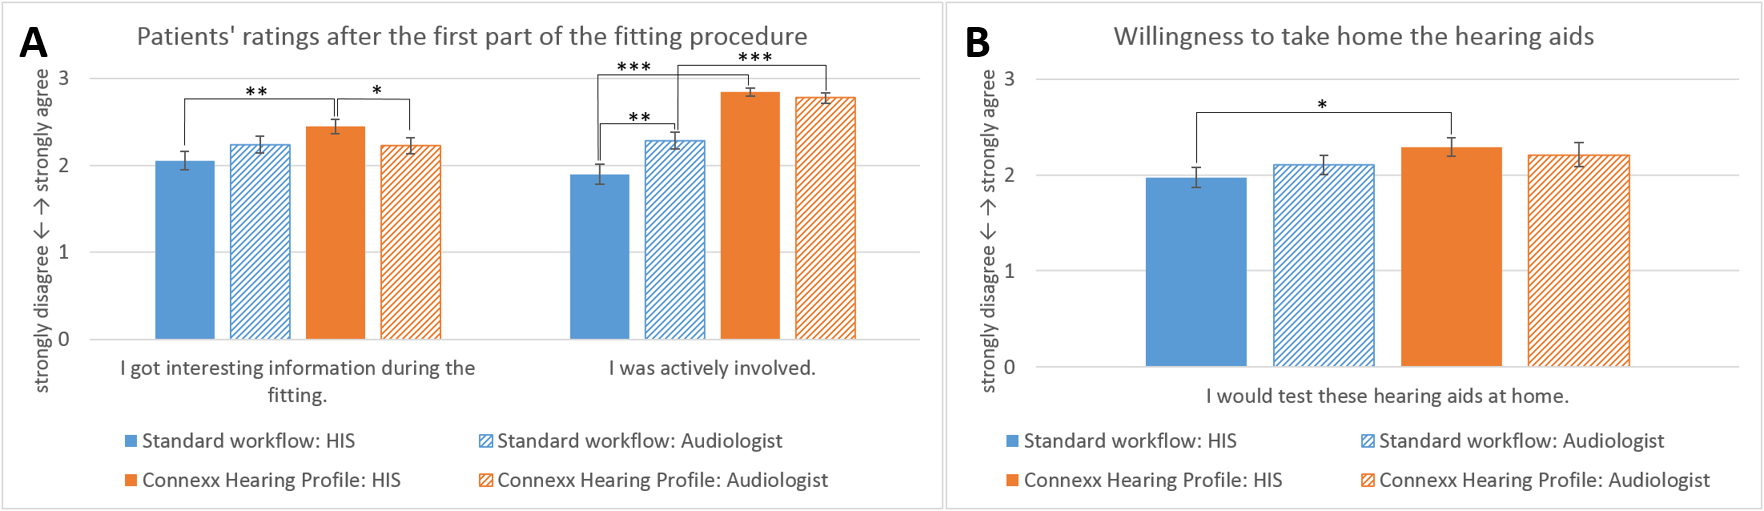 Patients‘ ratings of the standard workflow and the Connexx Hearing Profile depending on the HCP’s professional degree